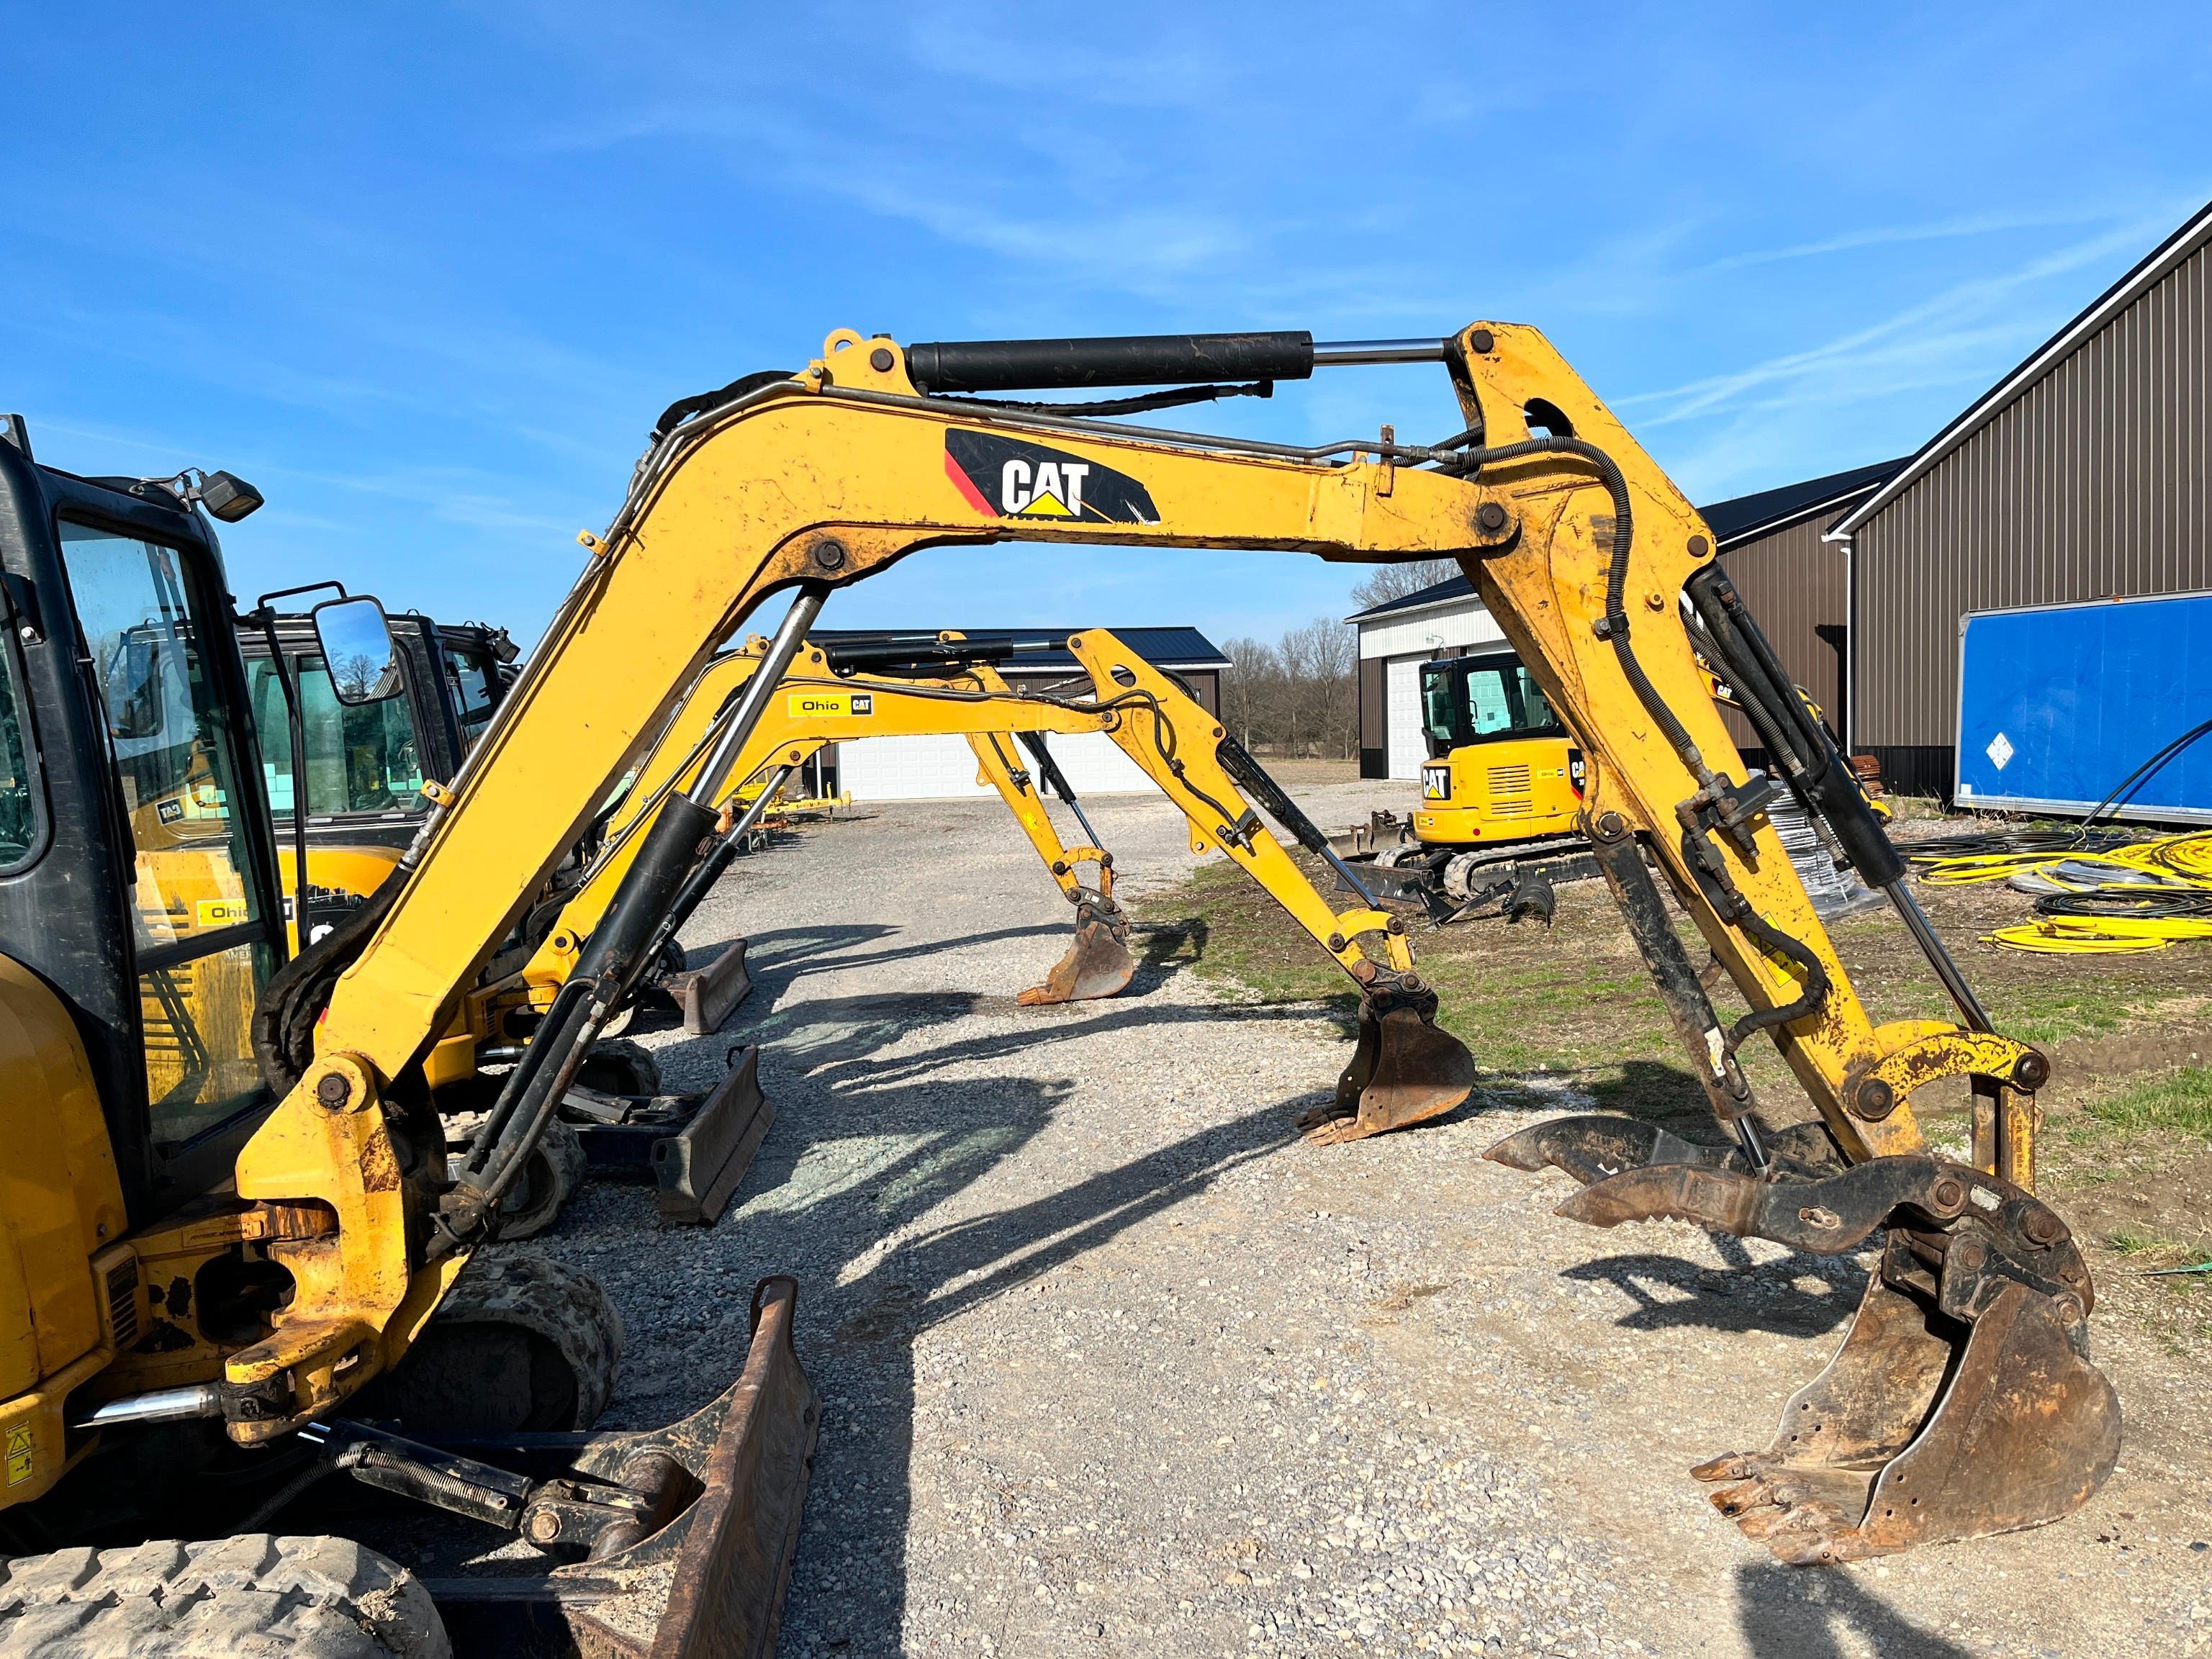 2014 CAT 305ECR HYDRAULIC EXCAVATOR SN:XFA03486 powered by Cat C2.4 diesel engine, equipped with